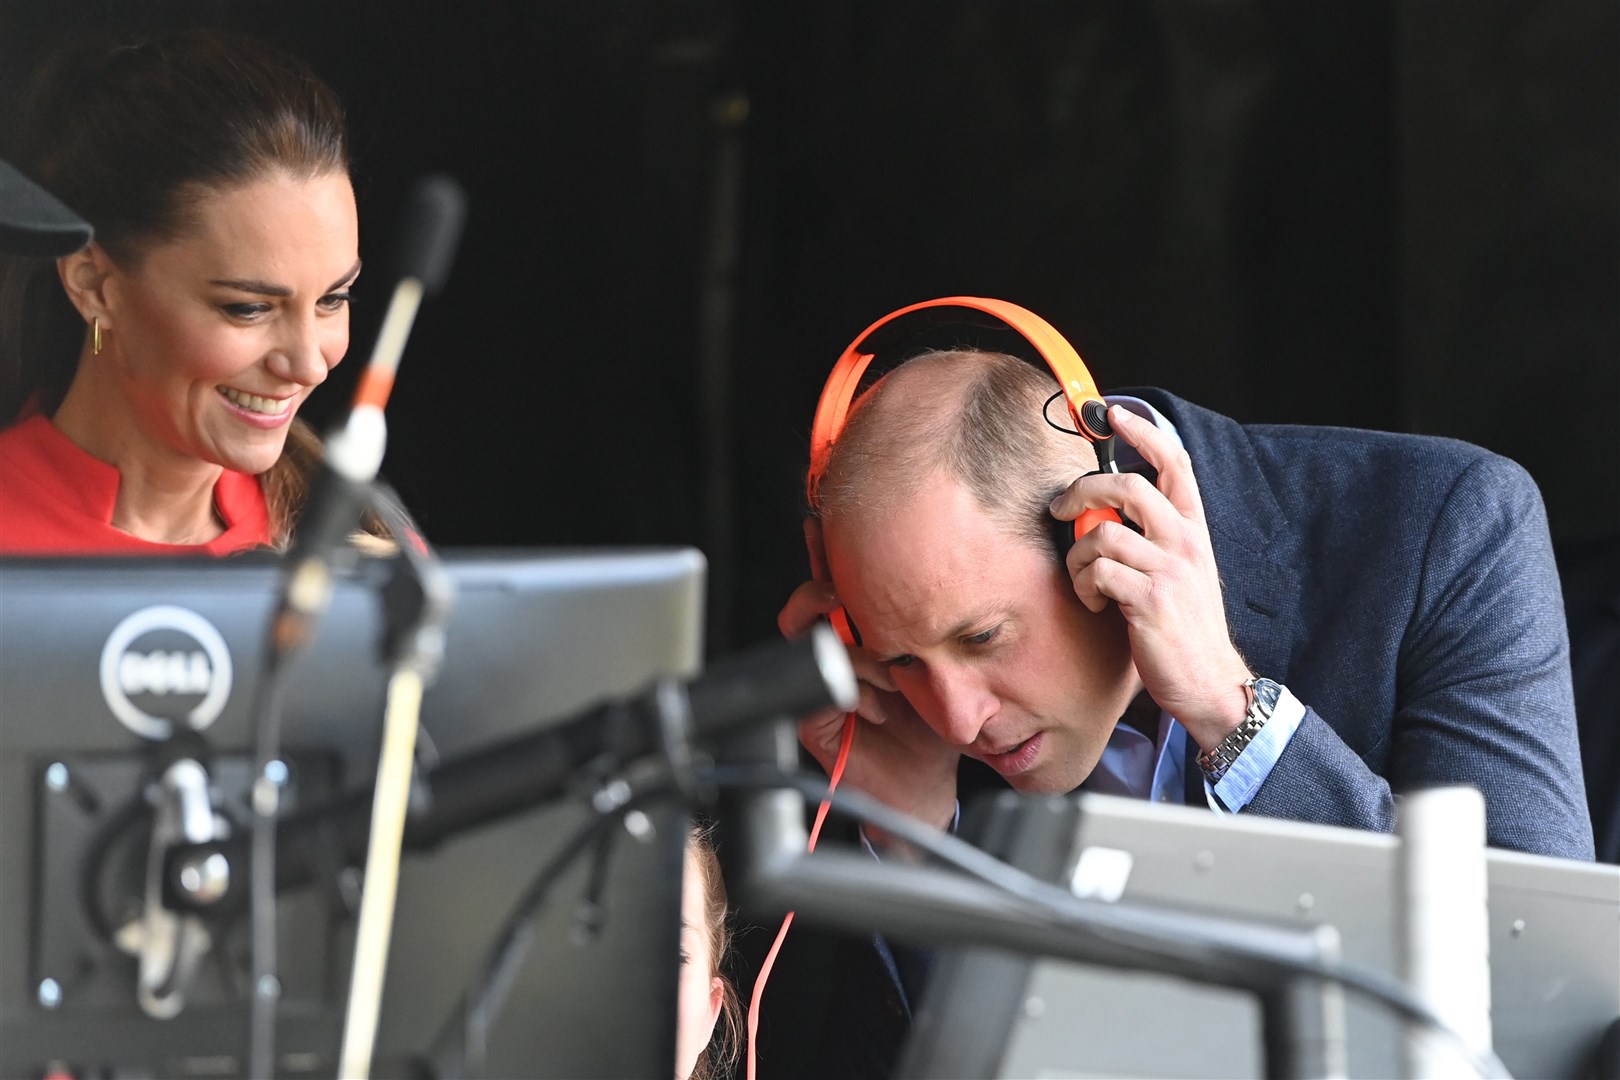 The Duke and Duchess of Cambridge visited the backstage preparations for a concert in Cardiff earlier on Saturday and will be at the show in London (Ashley Crowden/PA)